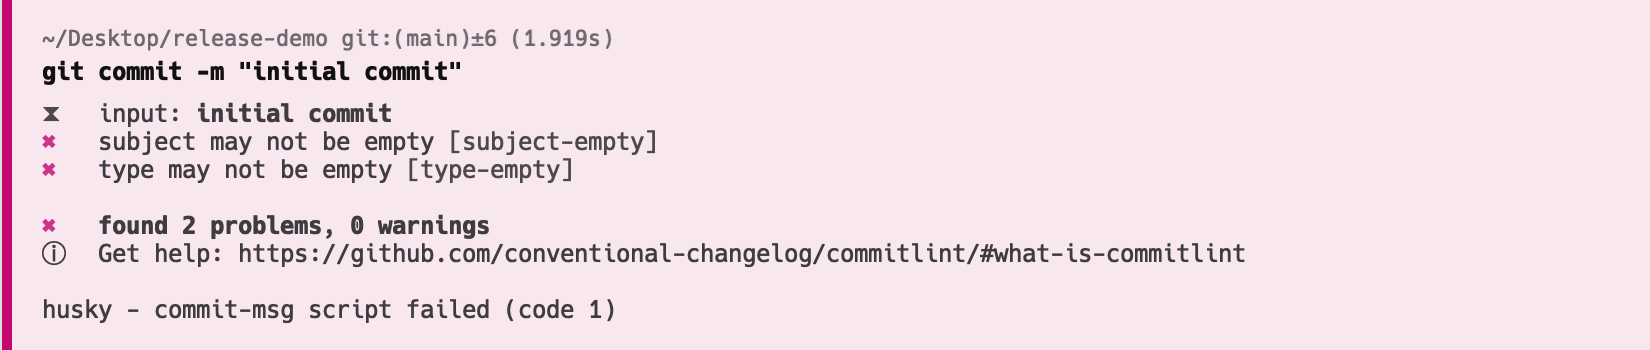 Screenshot showing the error message generated by Commitlint when a commit message does not adhere to the conventional commit format.